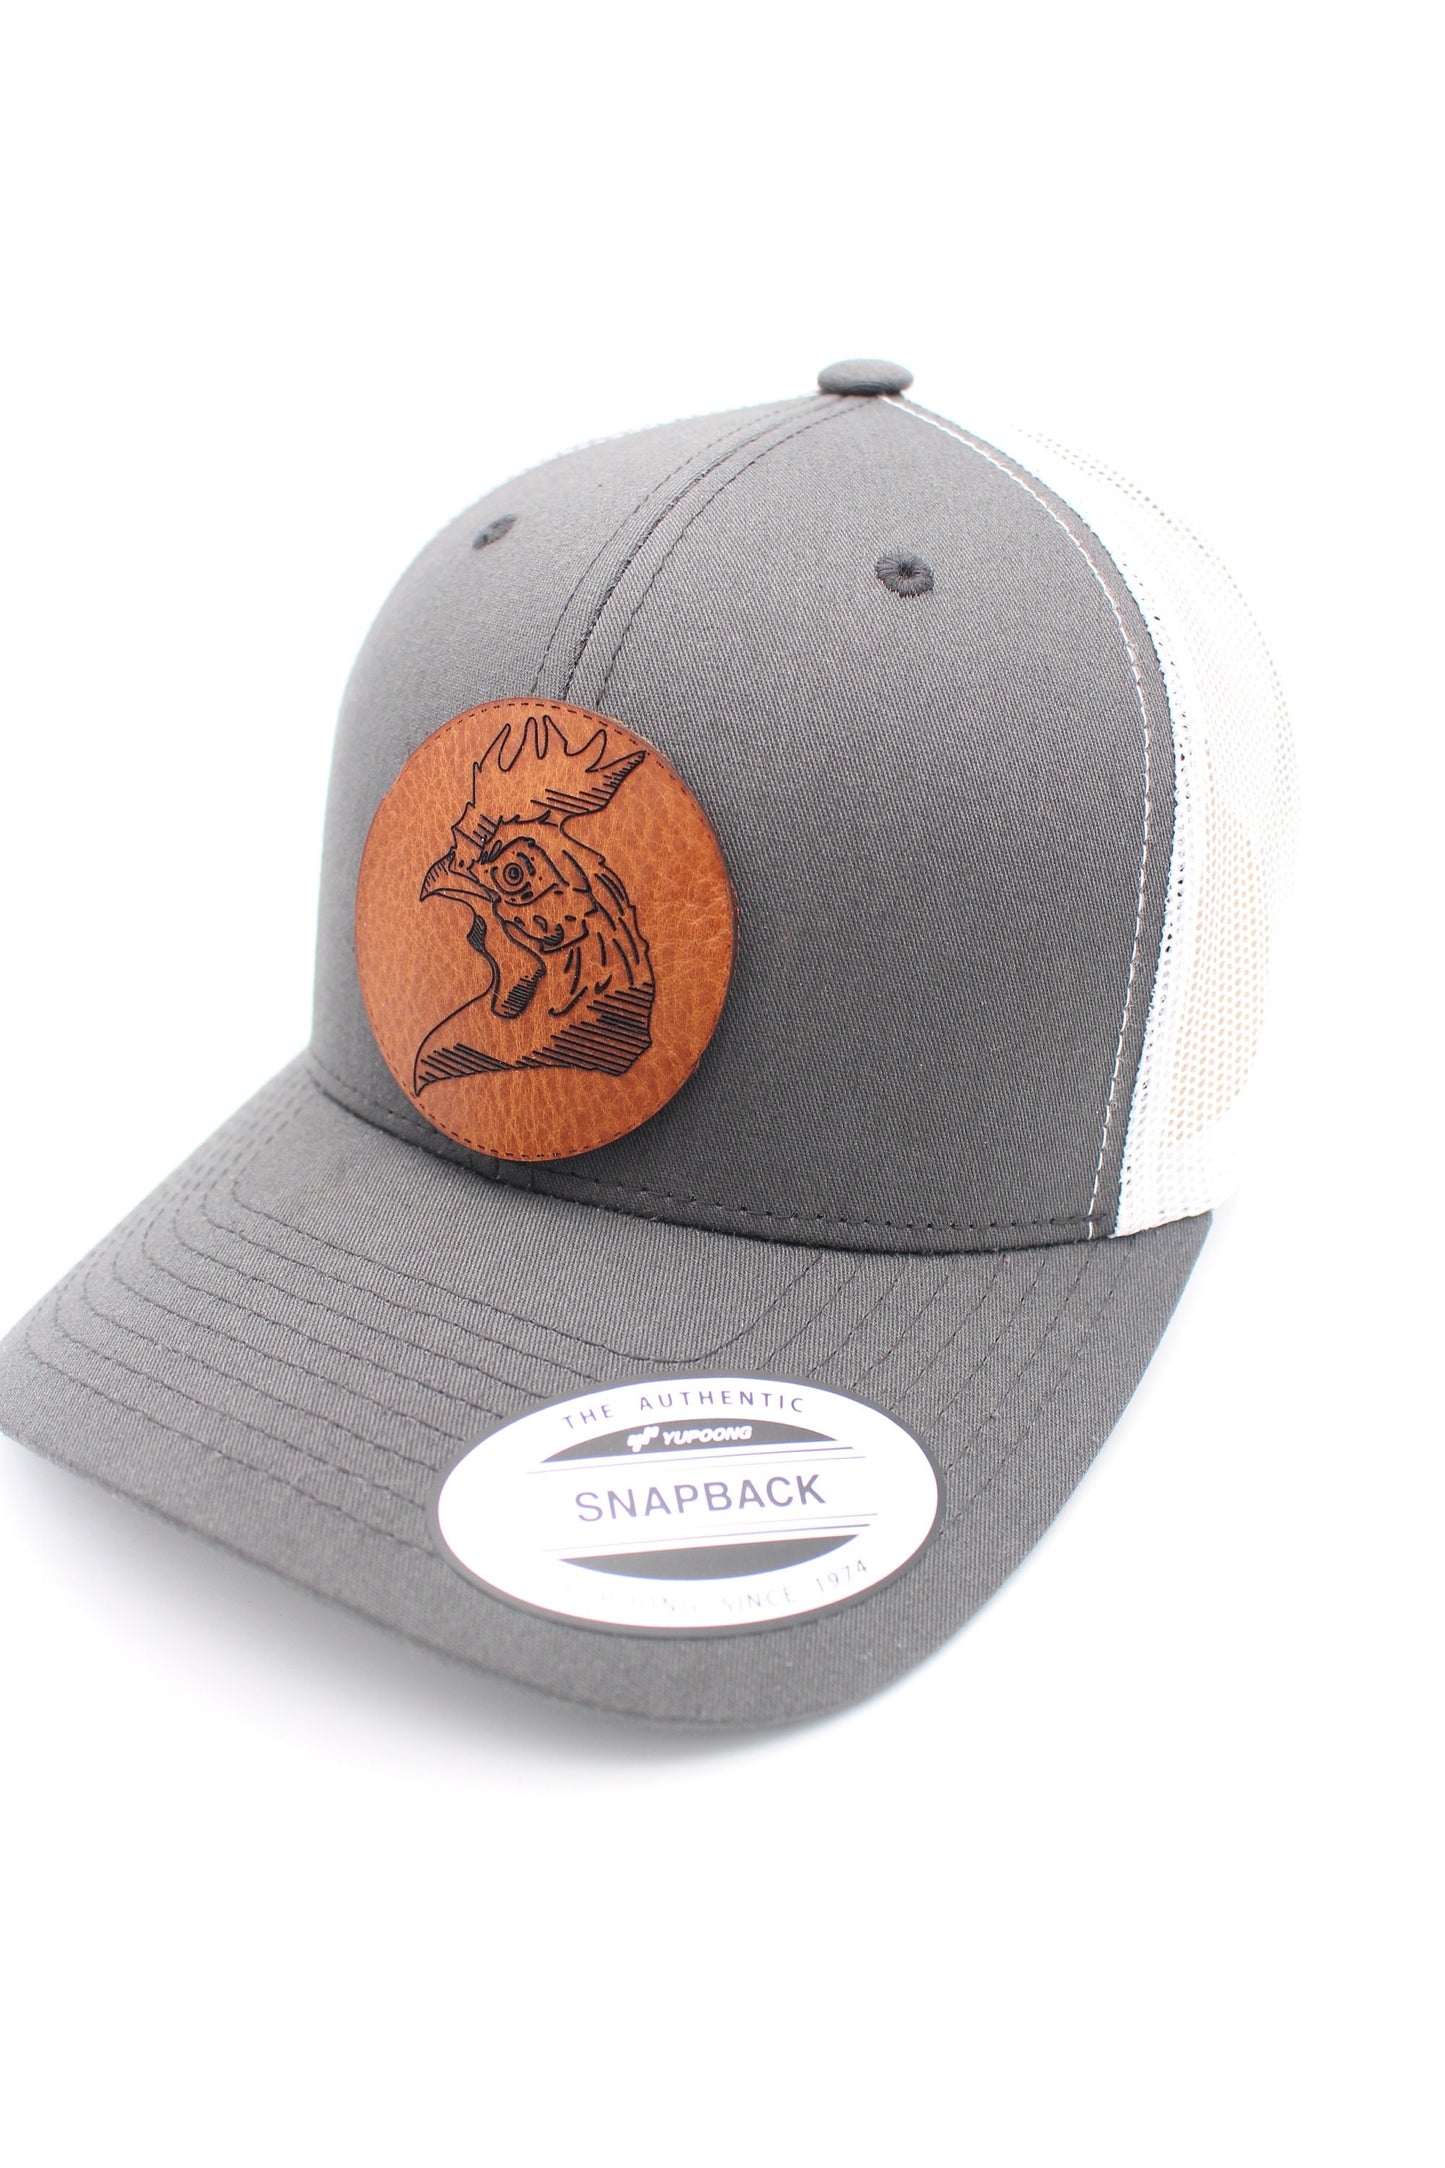 Rooster Leather Patch Hat Mesh Back Snapback Ball Cap